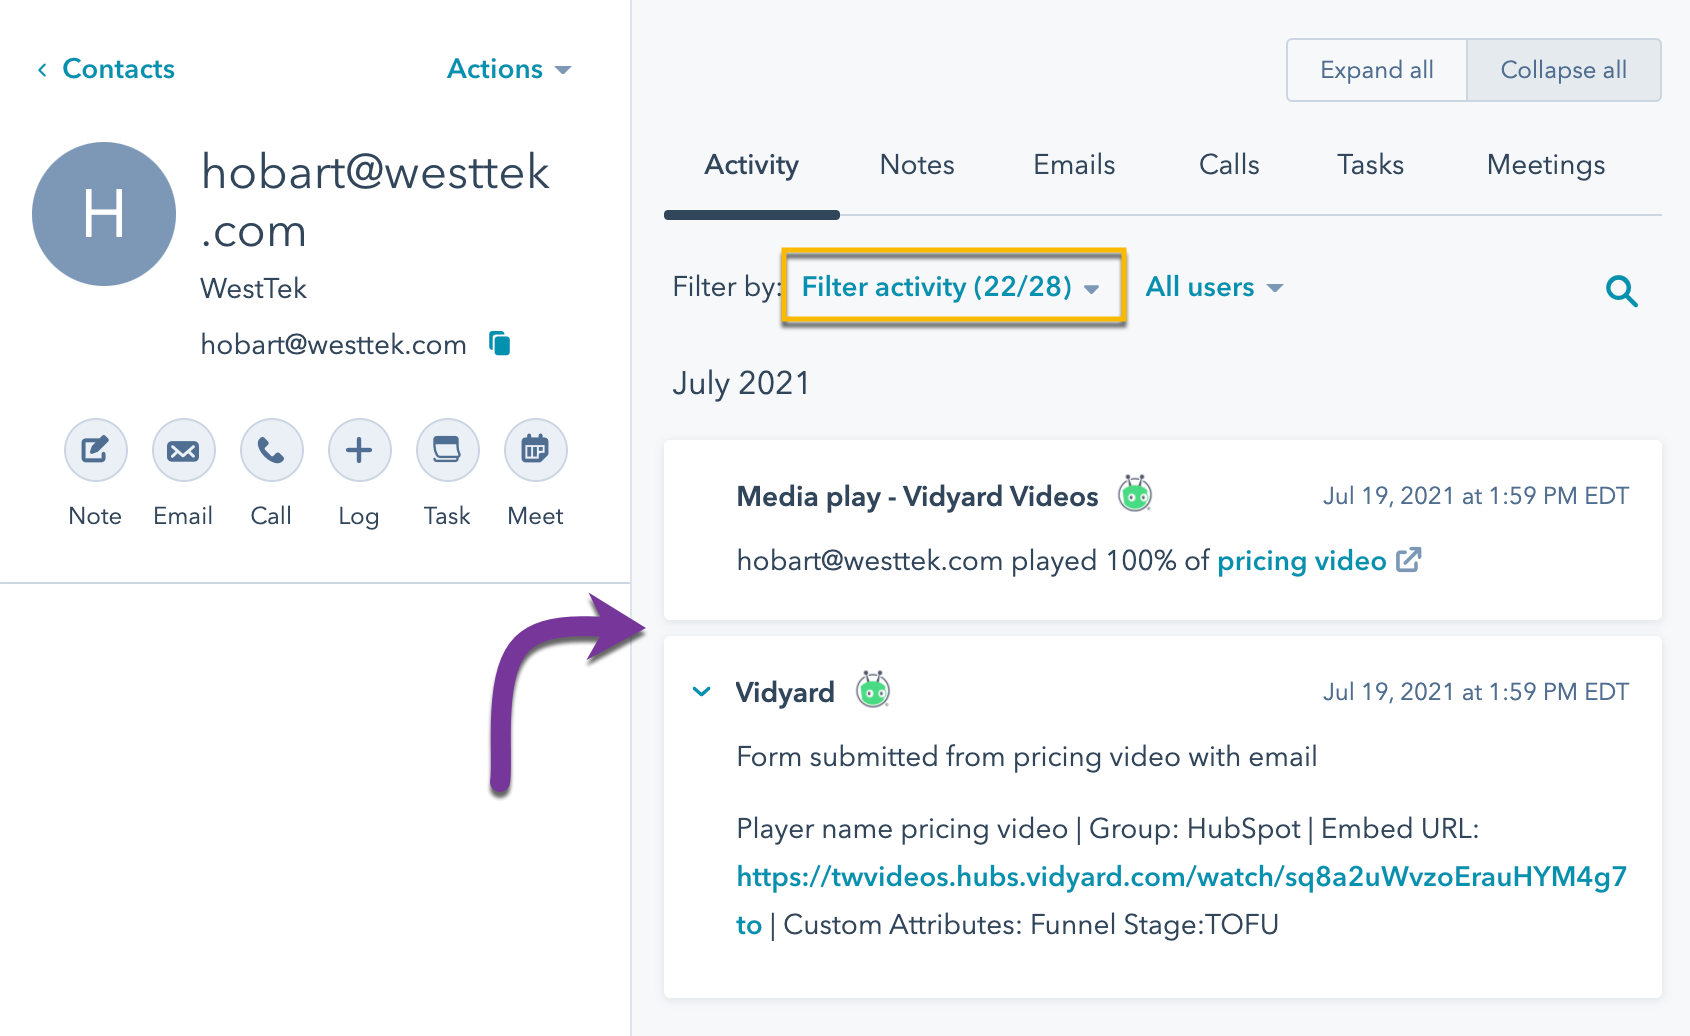 A Media Play and Form Fill event from Vidyard appearing on your contact's activity timeline in HubSpot